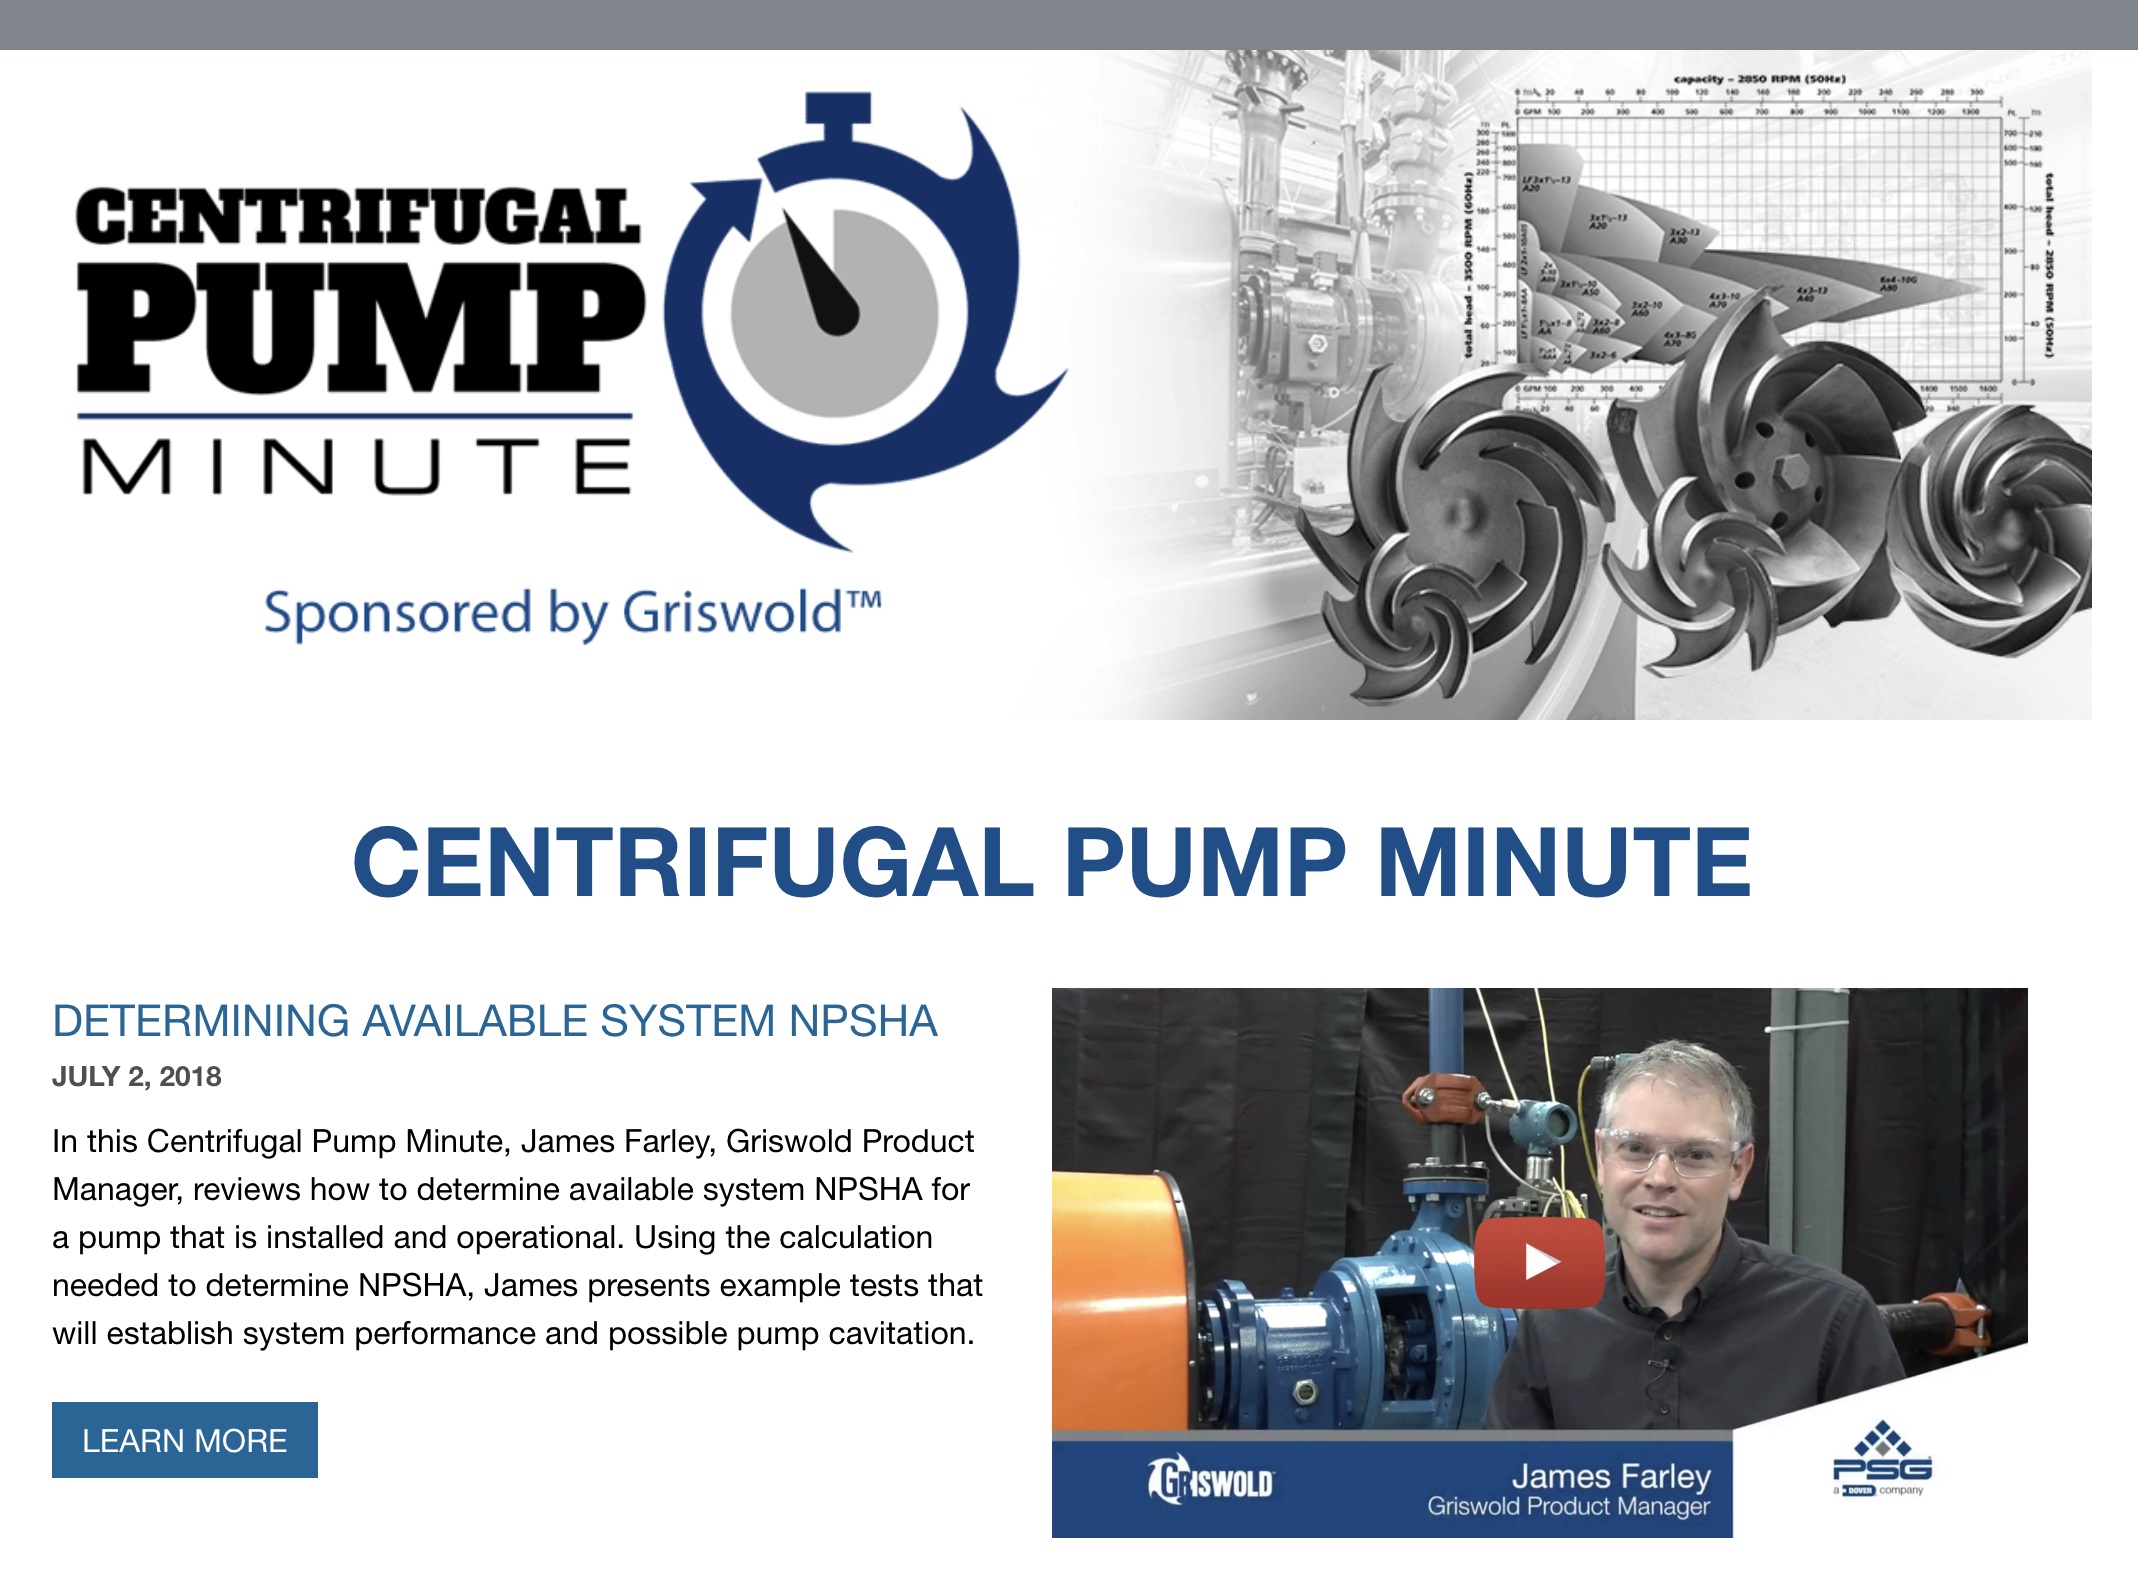 Griswold's first vlog reviews how to determine available system NPSHA for a pump that is installed and operational.